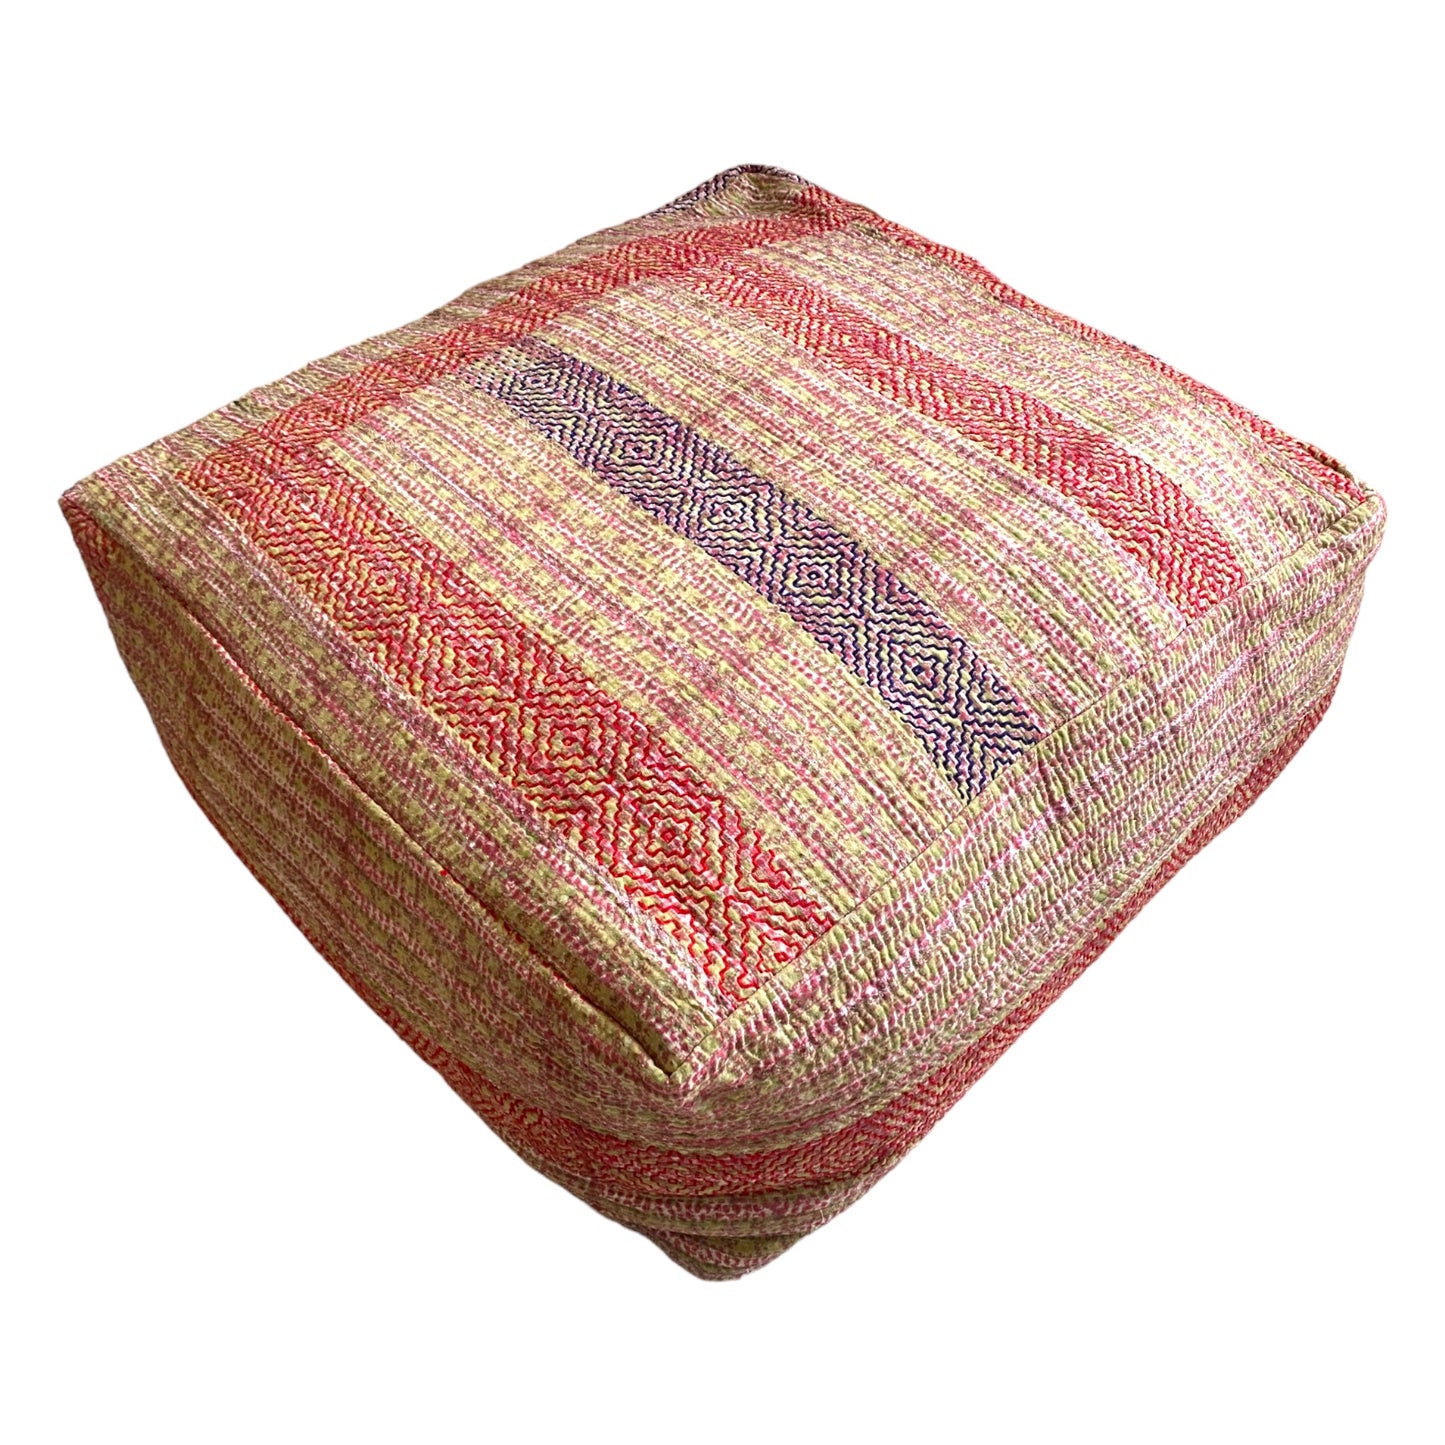 Red and blue floor kantha cushion